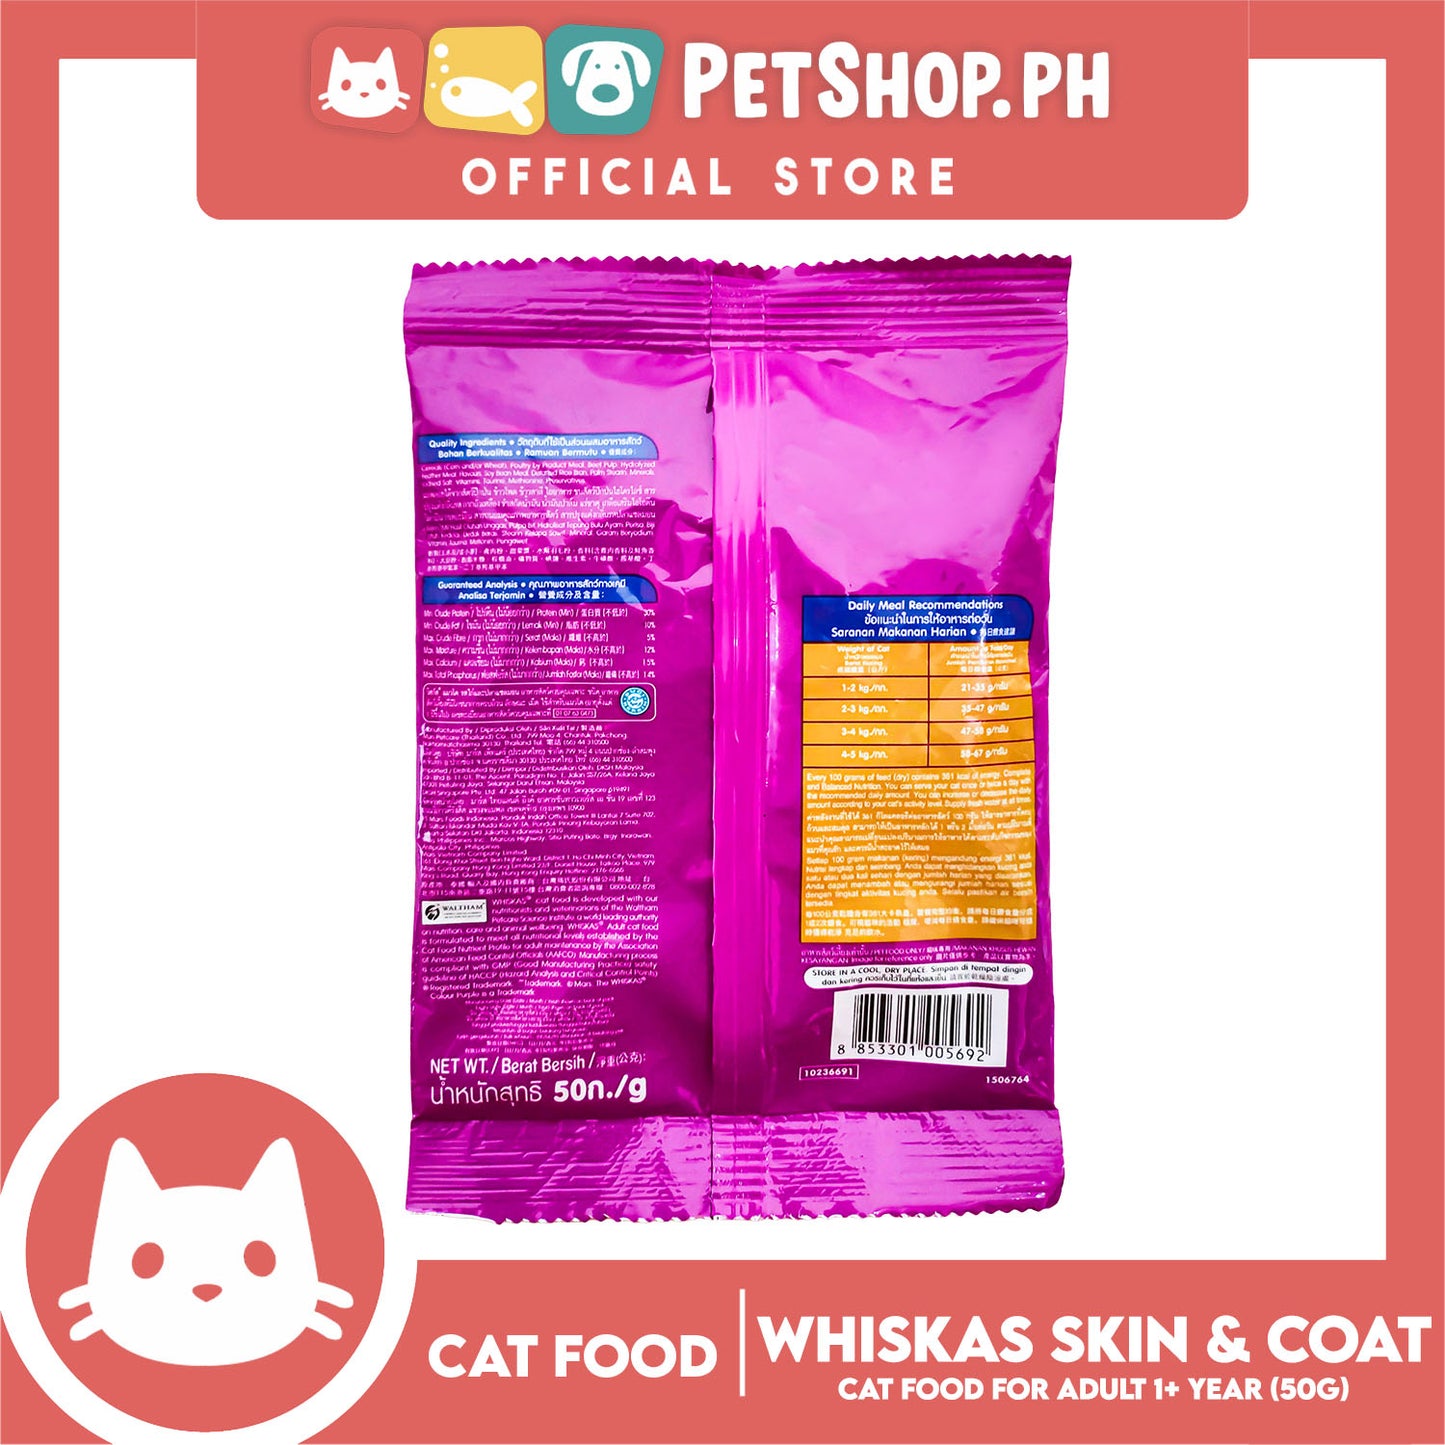 Whiskas Skin And Coat 50g Helps Maintain Healthy Skin And Coat For Adult, Cat Food, Dry Food For Adult Cat